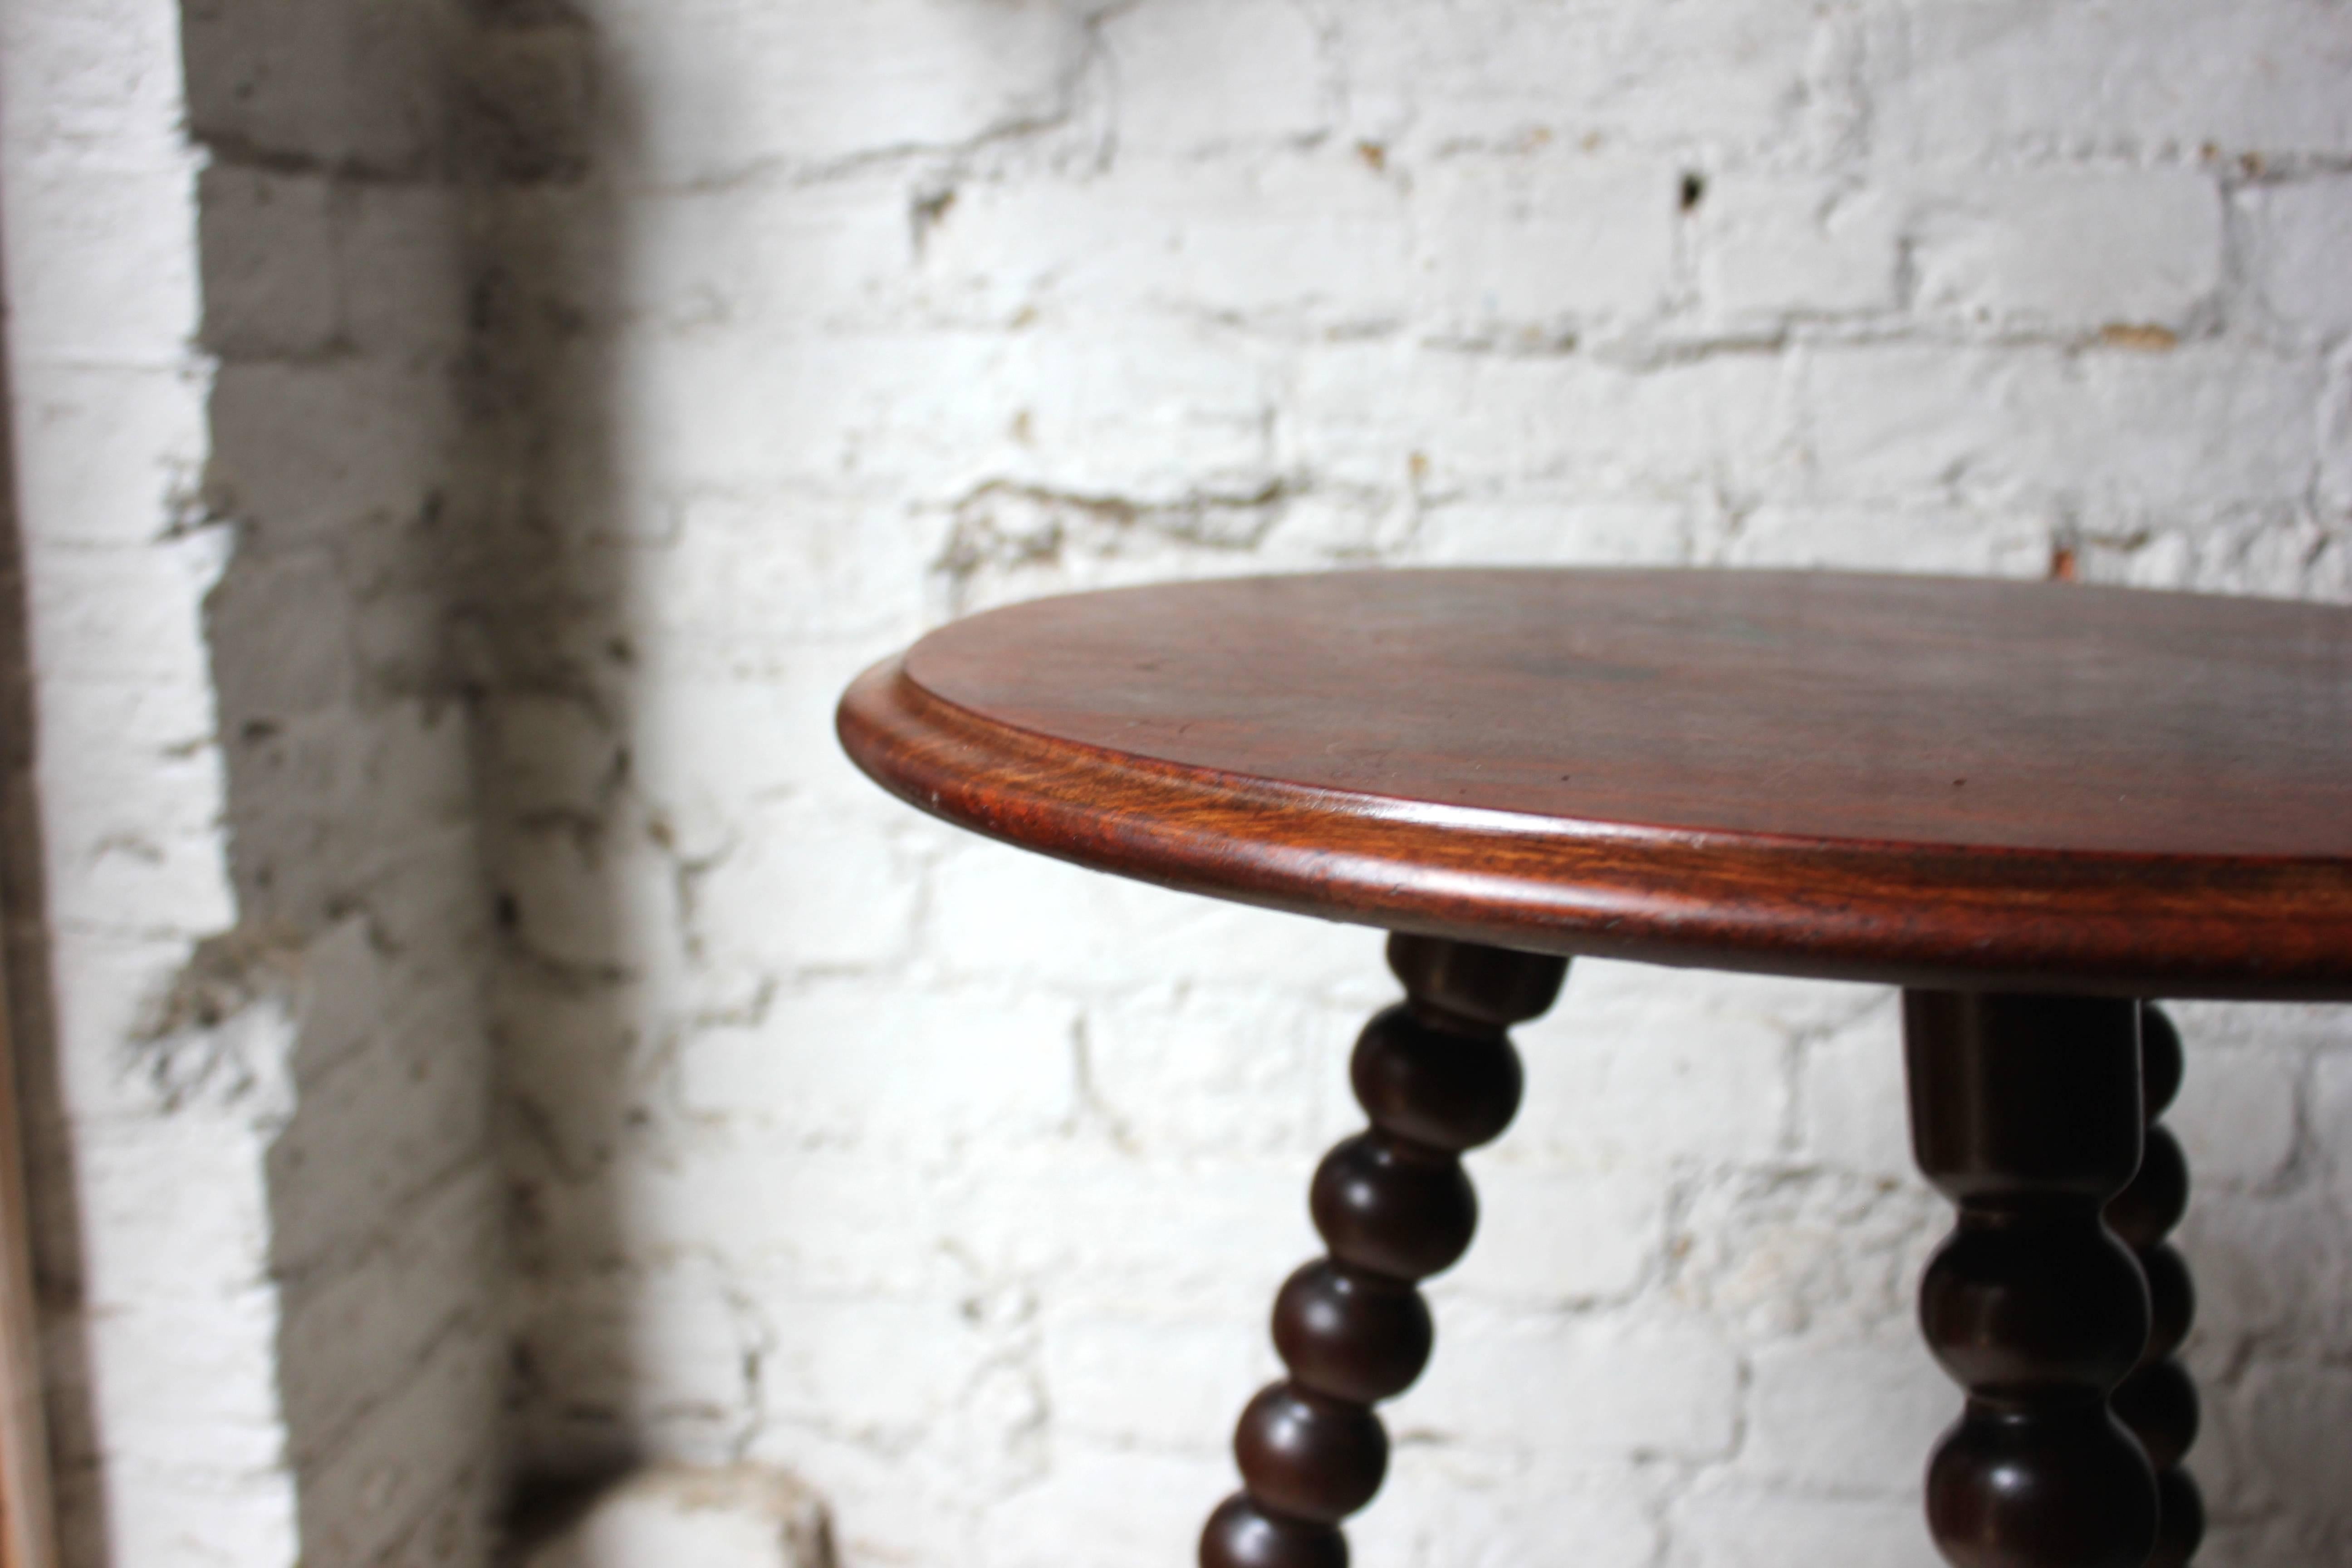 The walnut bobbin table of good color with a mahogany circular top supported by three bobbin-turned legs, surviving from last quarter of 19th century, England.

The table is structurally sound and stabile, with the expected surface wear with a